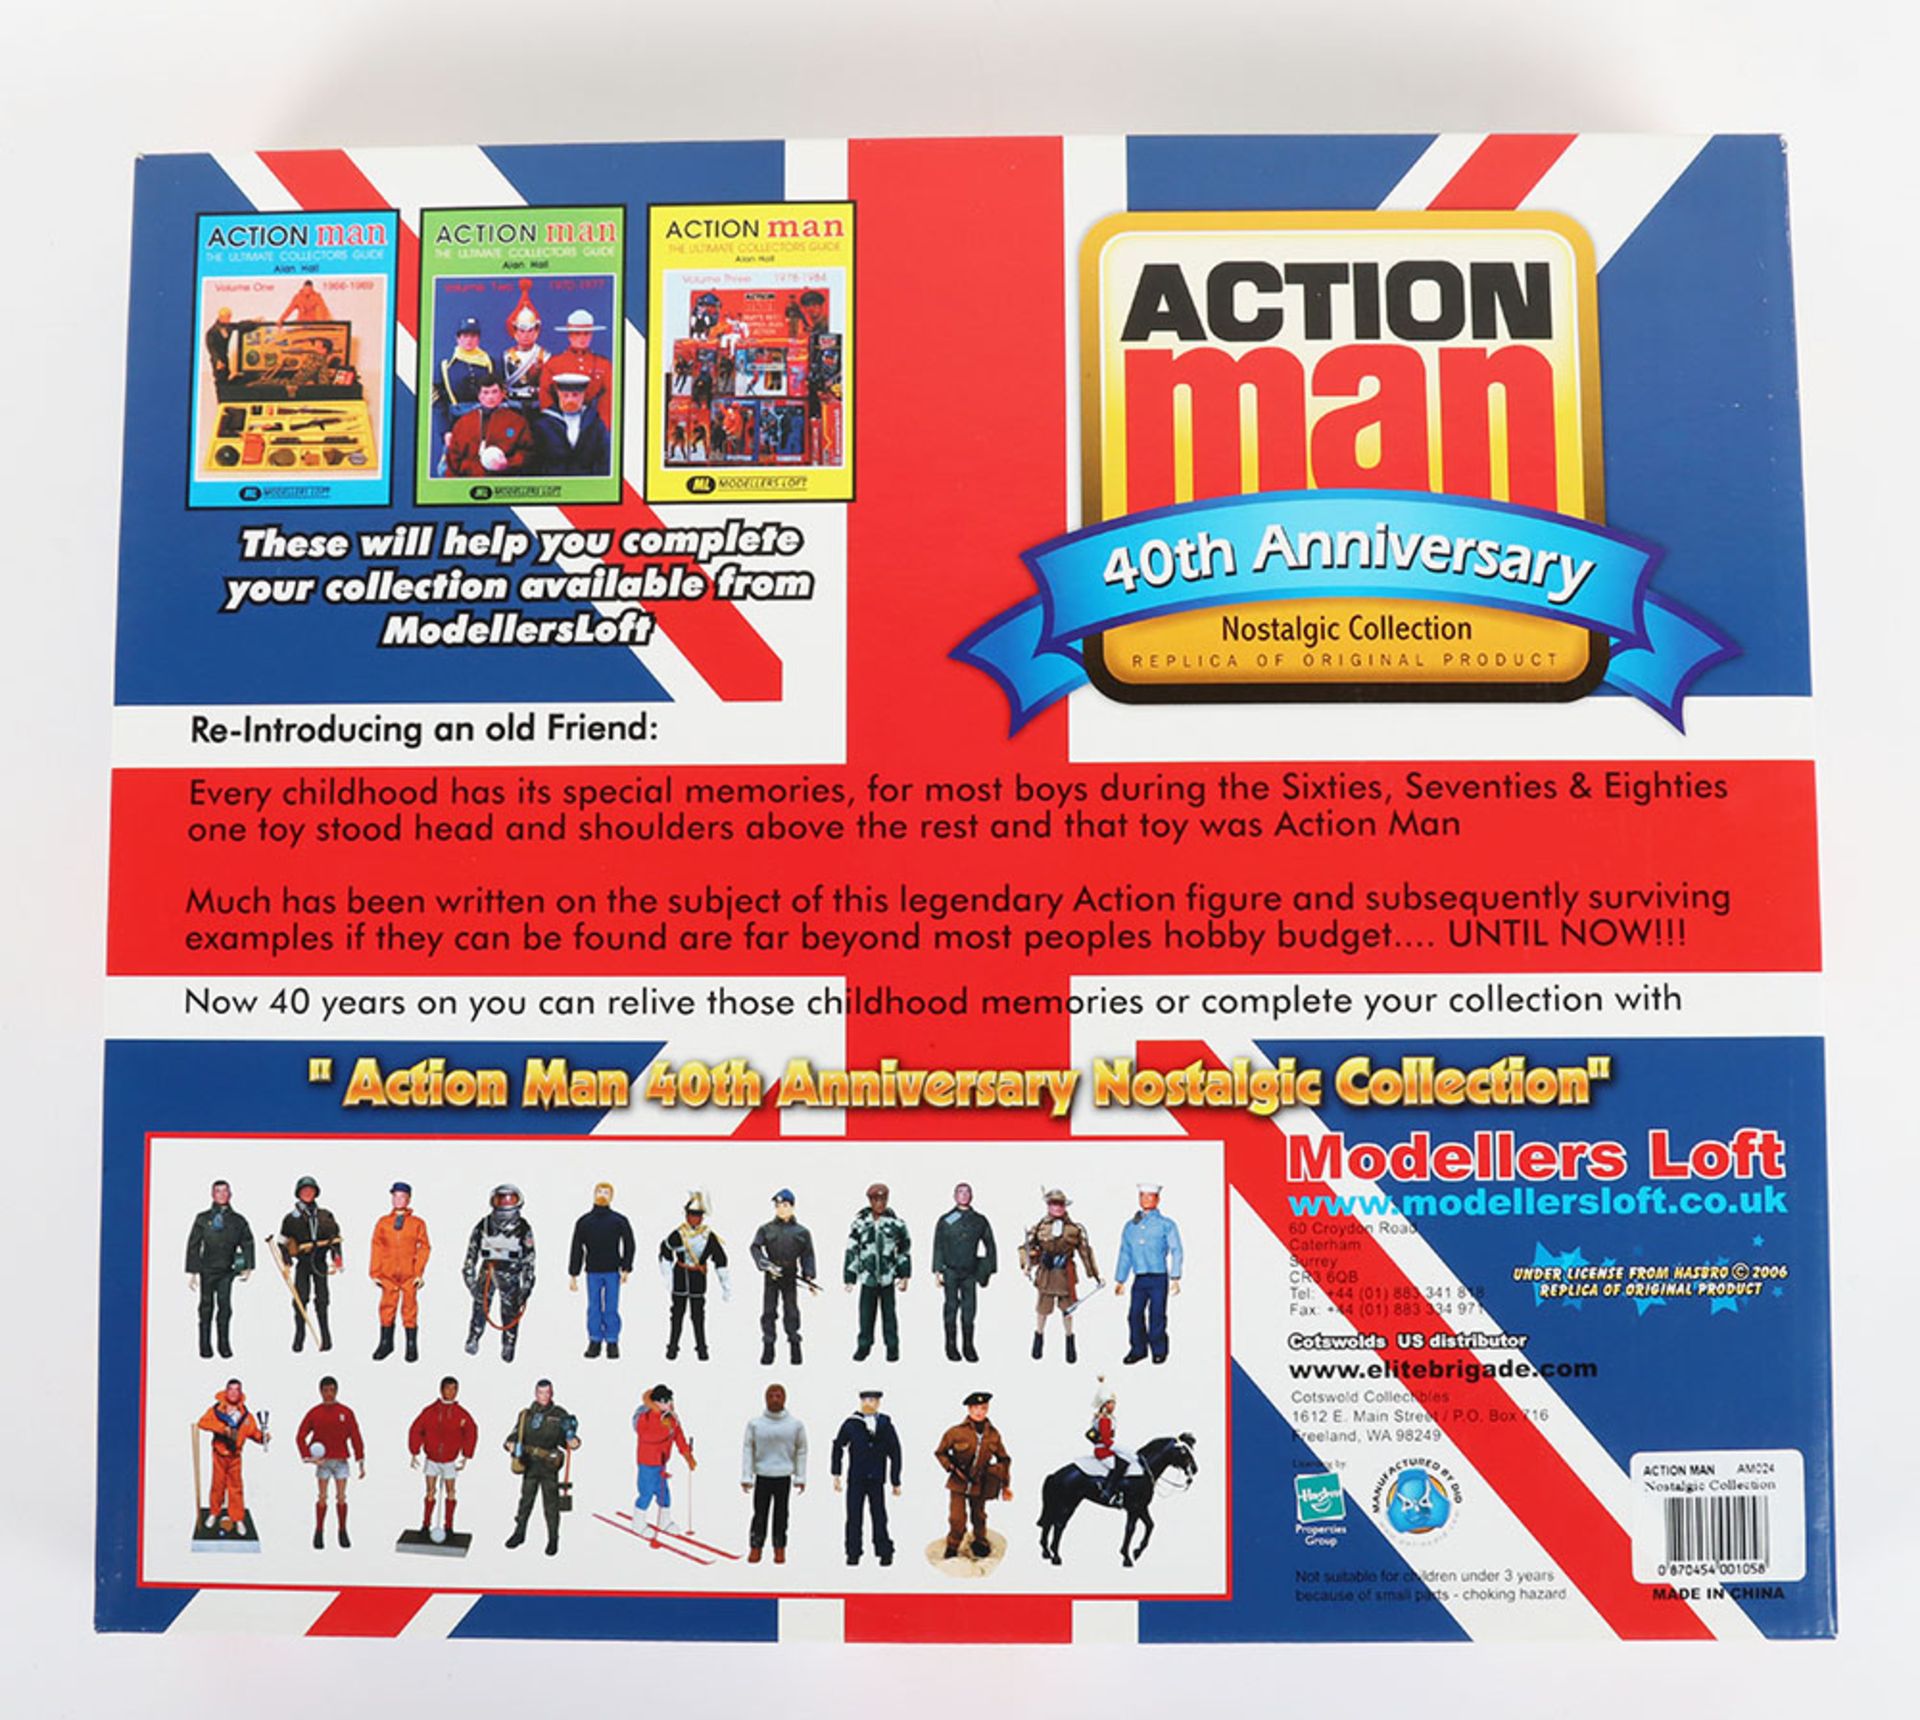 Action Man Famous British Uniforms The Marine Combat 40th Anniversary Nostalgic Collection - Image 2 of 4